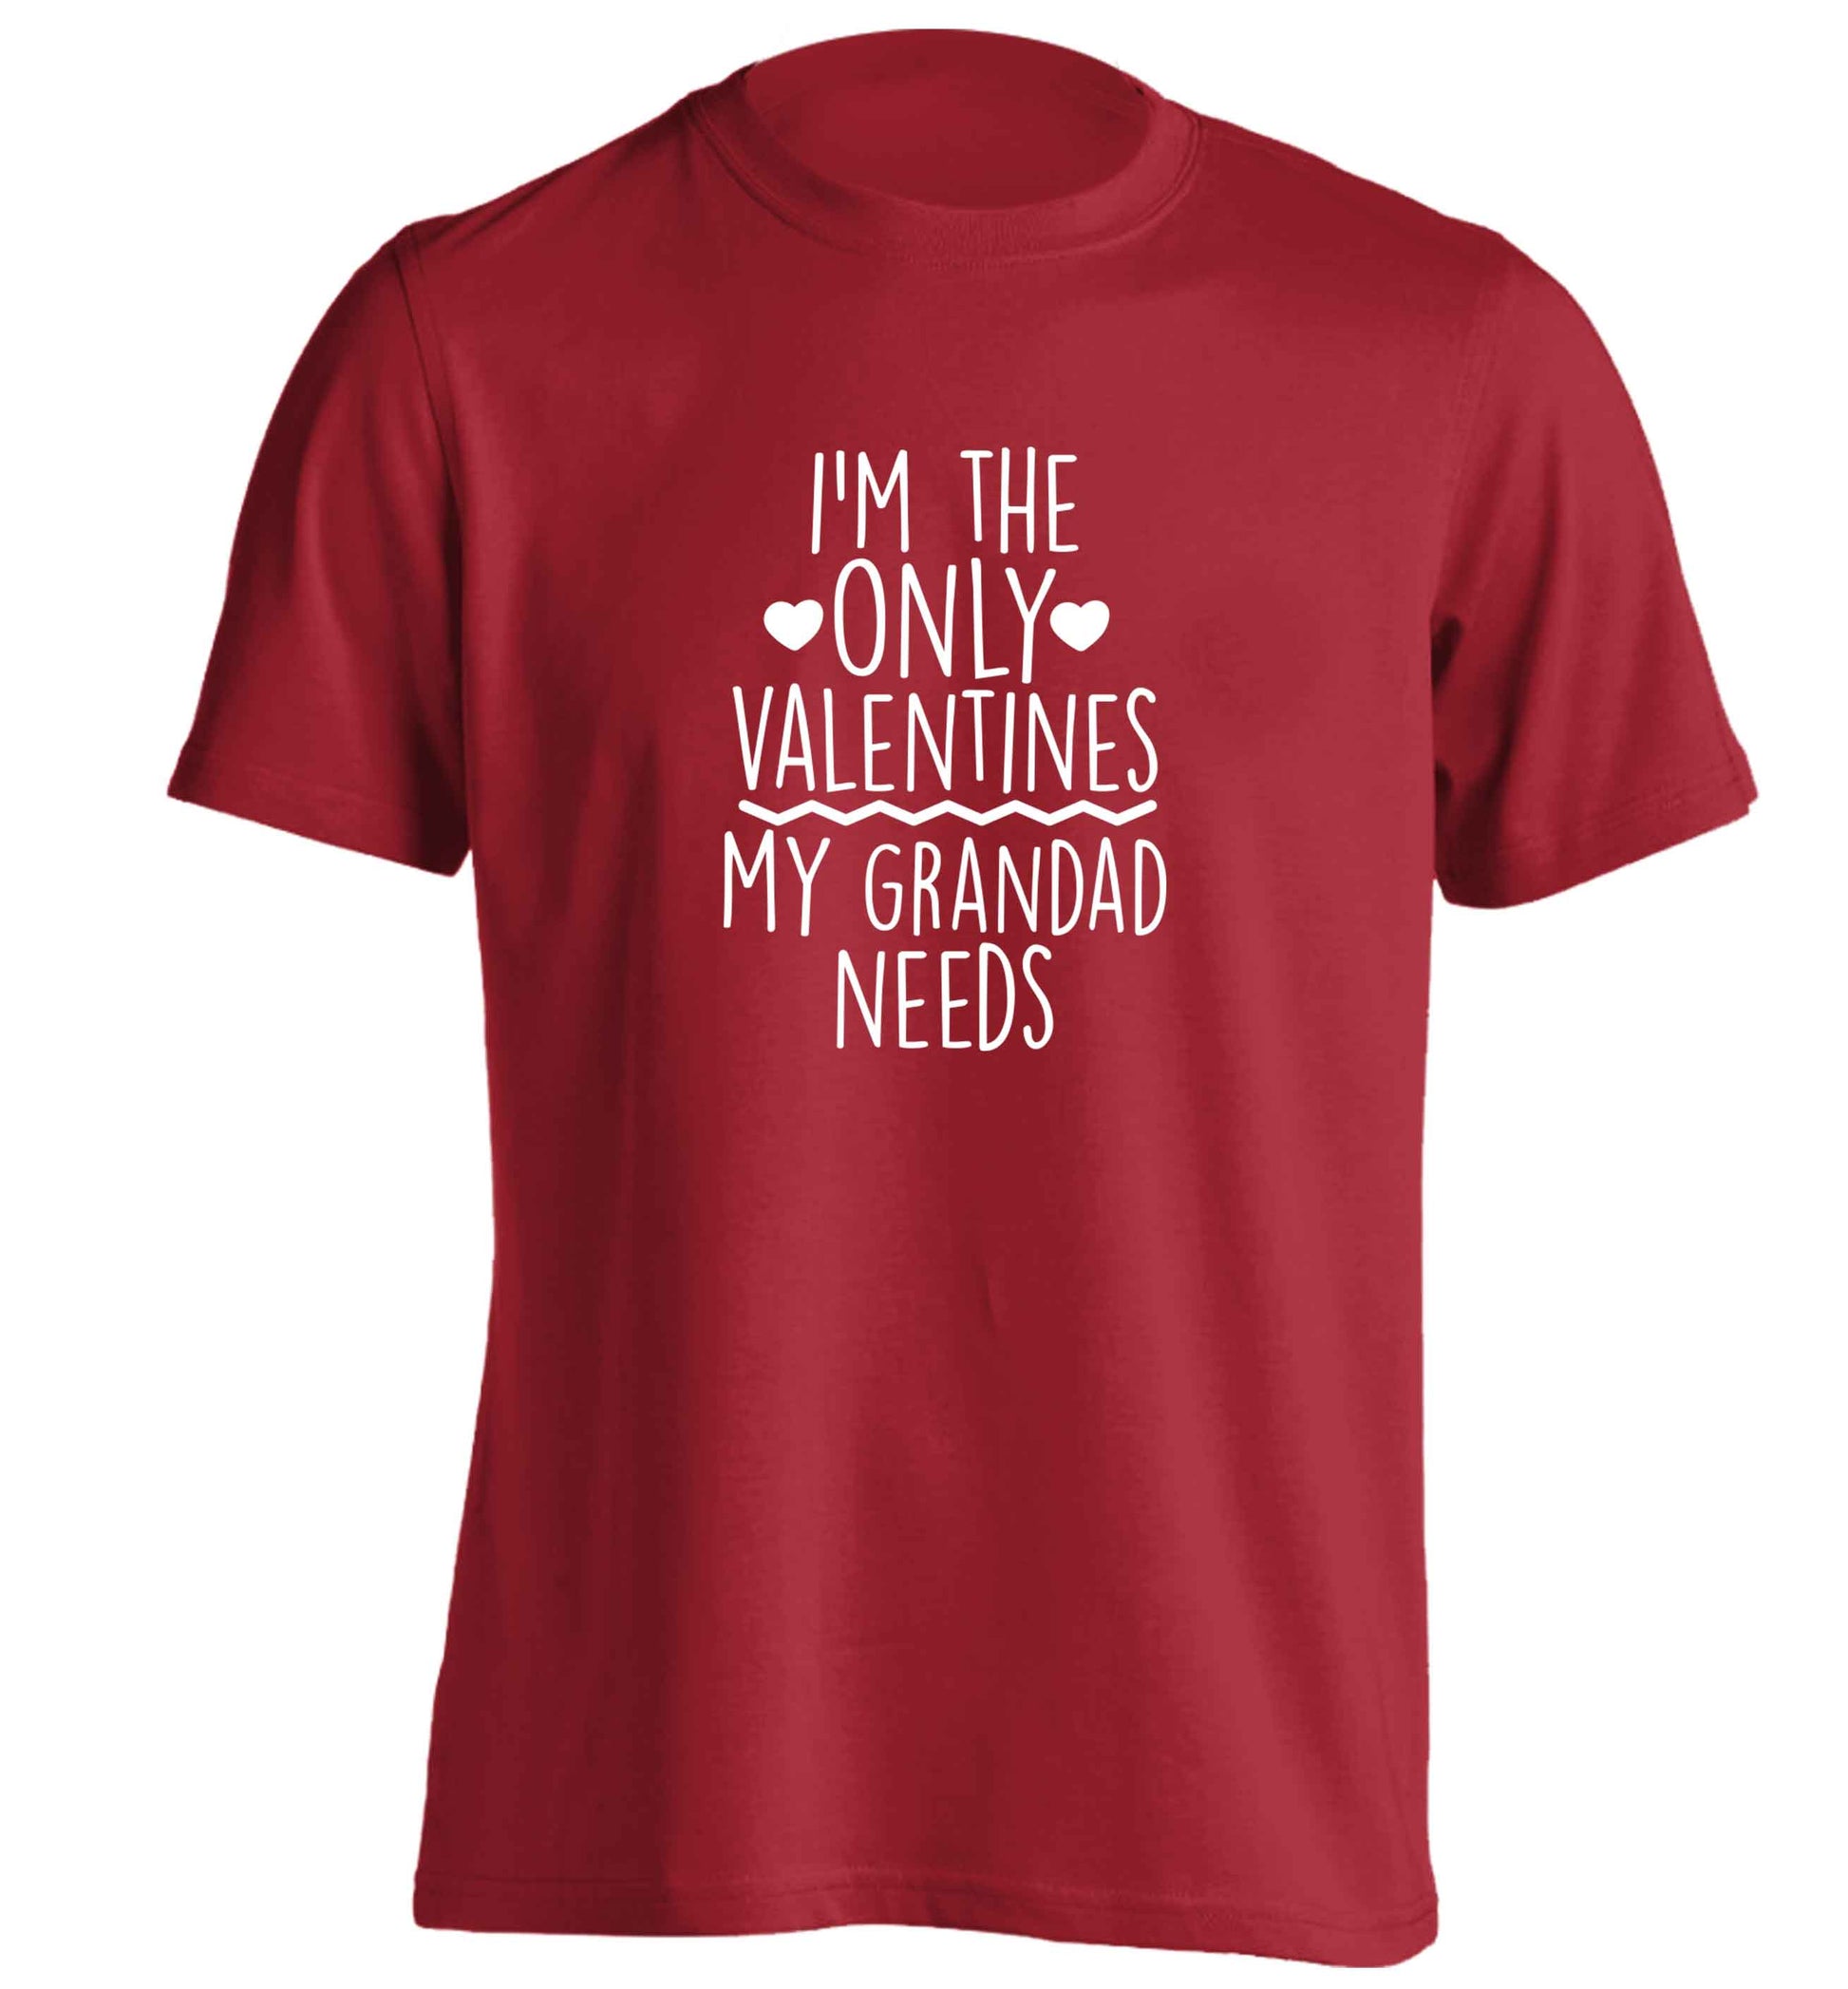 I'm the only valentines my grandad needs adults unisex red Tshirt 2XL